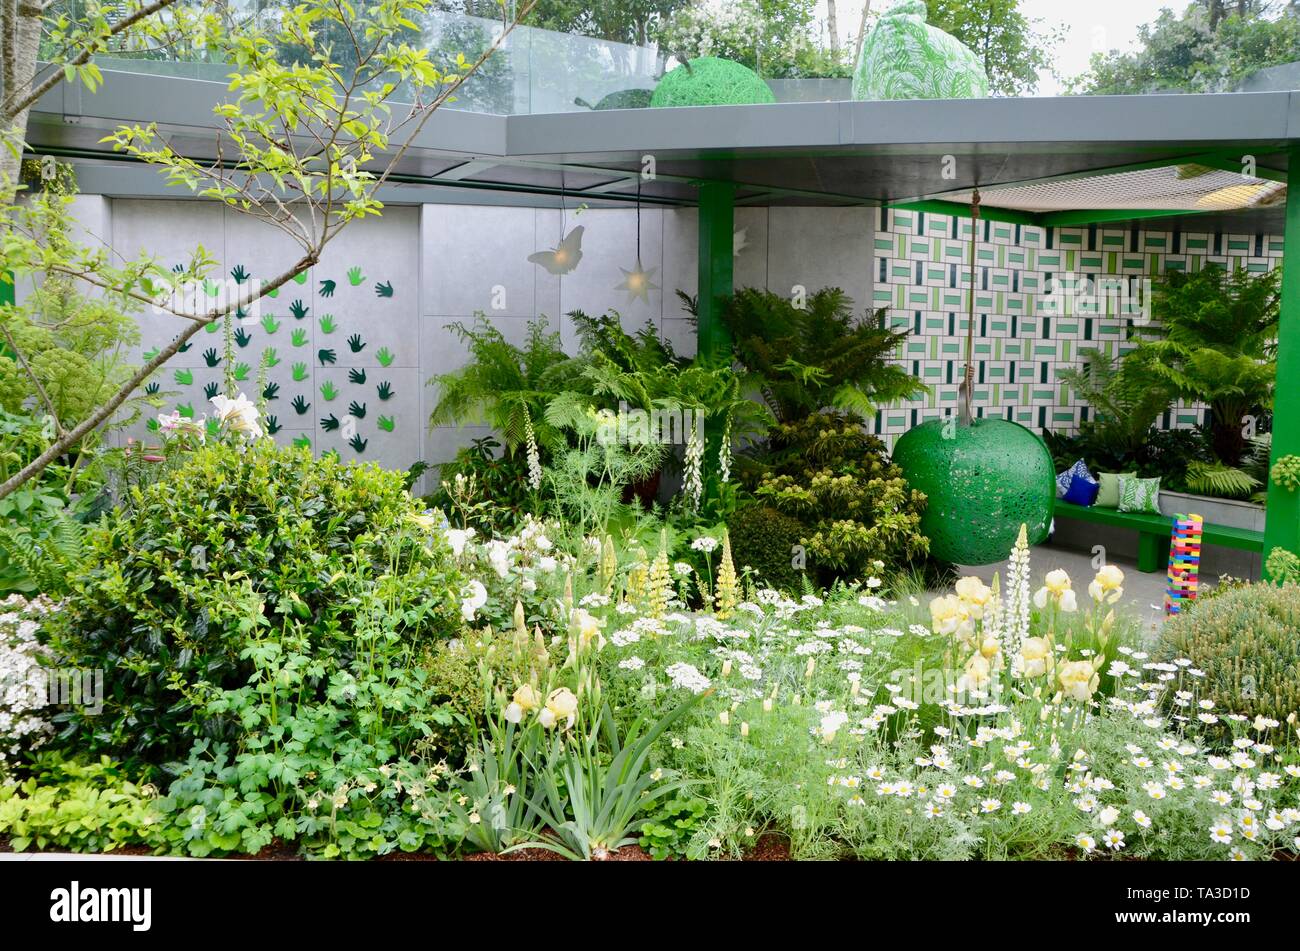 The Greenfingers Charity Garden at the 2019 rhs chelsea flower show in london england Stock Photo